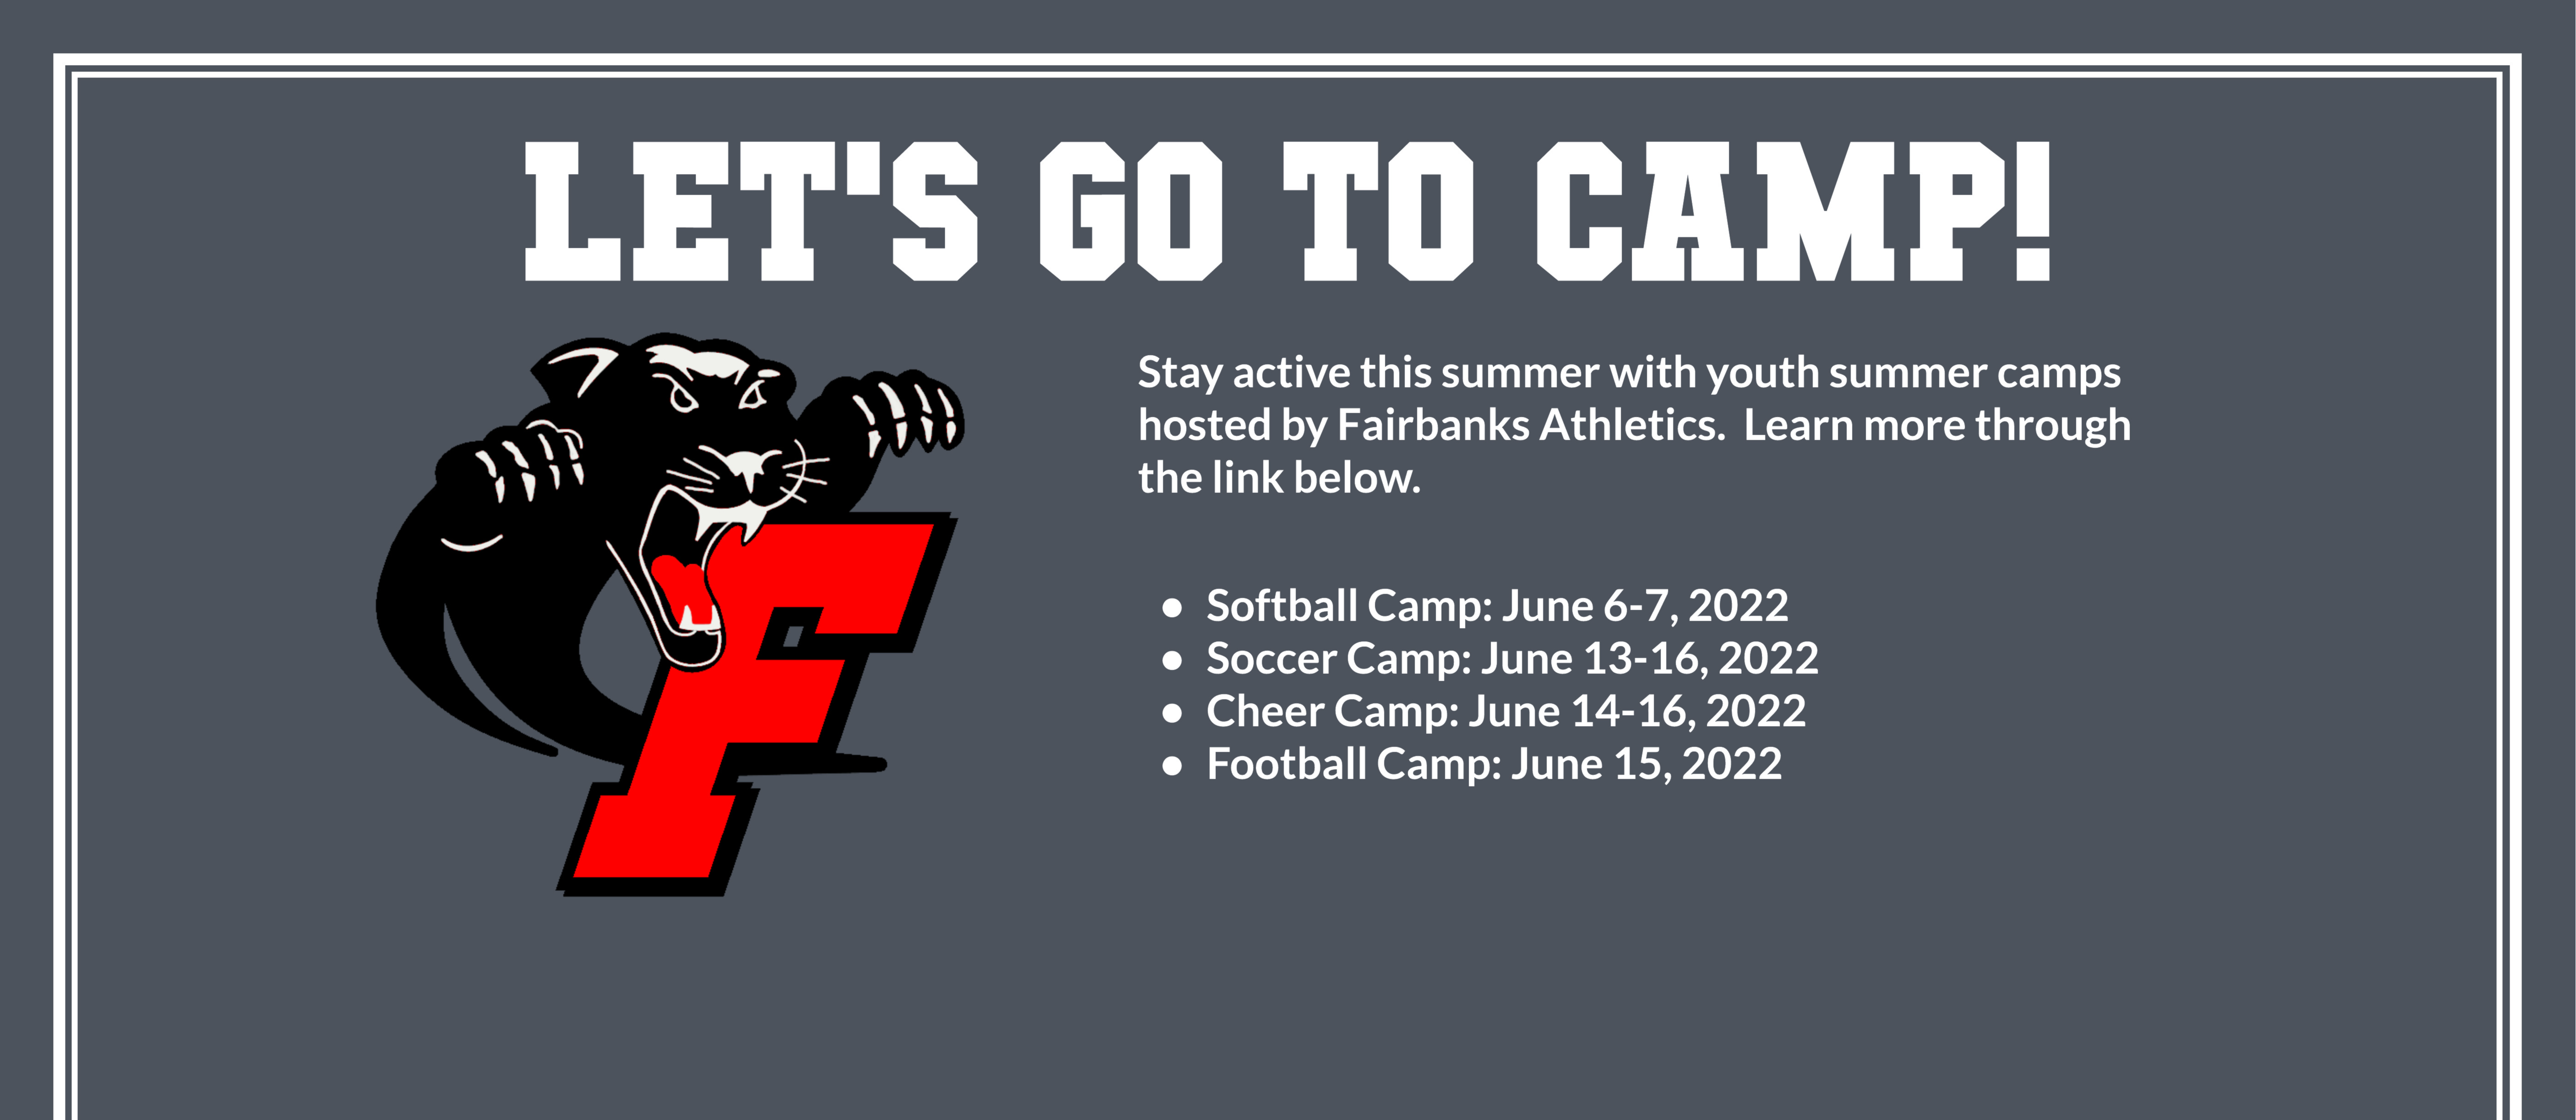 Youth Camps